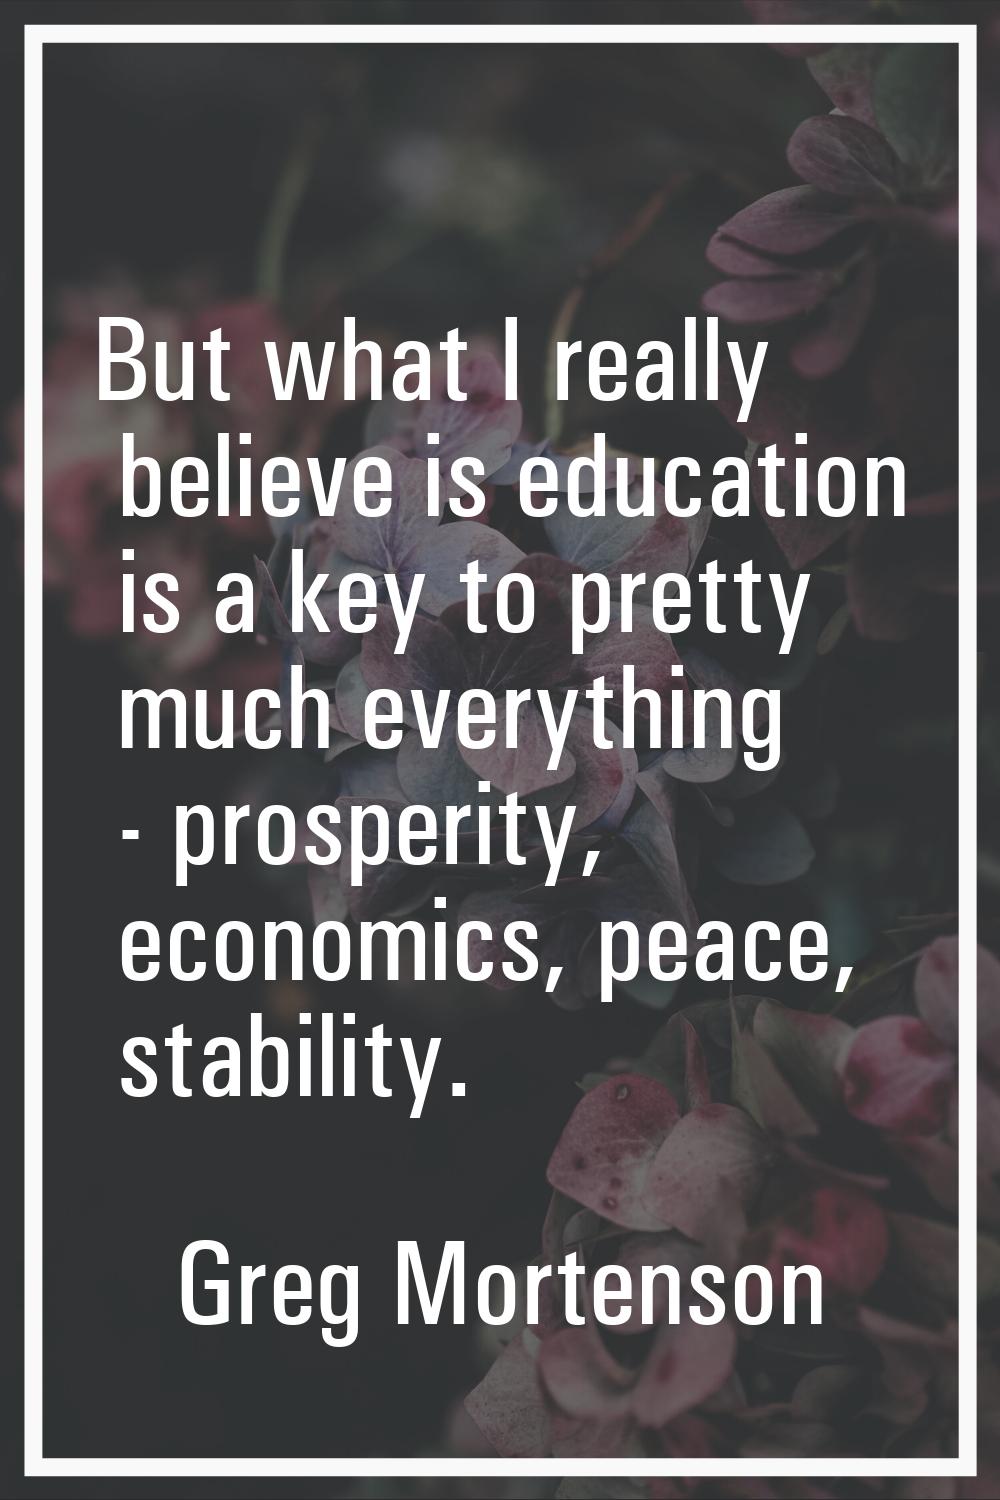 But what I really believe is education is a key to pretty much everything - prosperity, economics, 